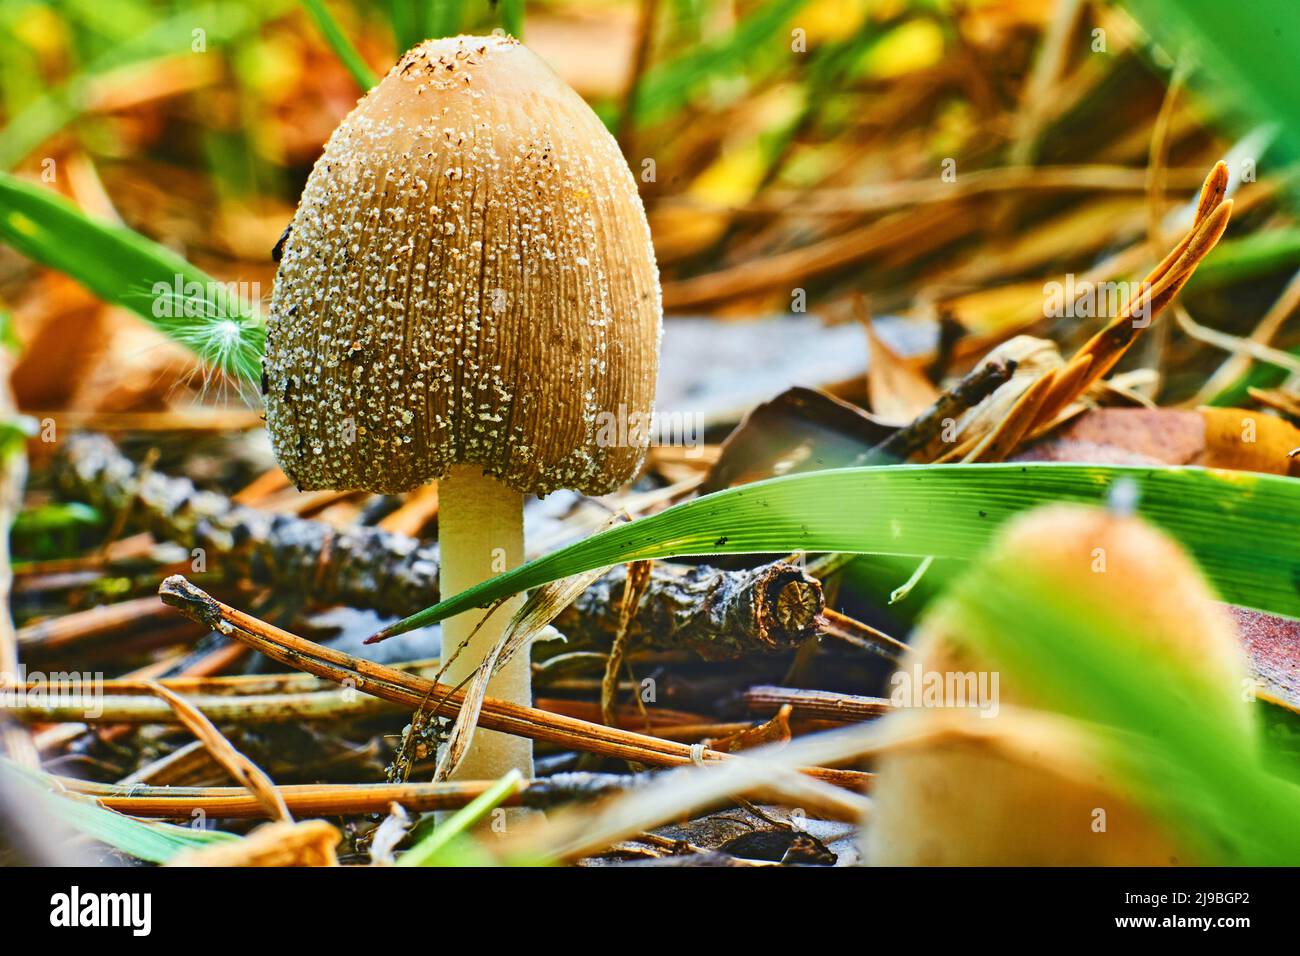 Ginger mushroom among green grass on a sunny summer warm day Stock Photo